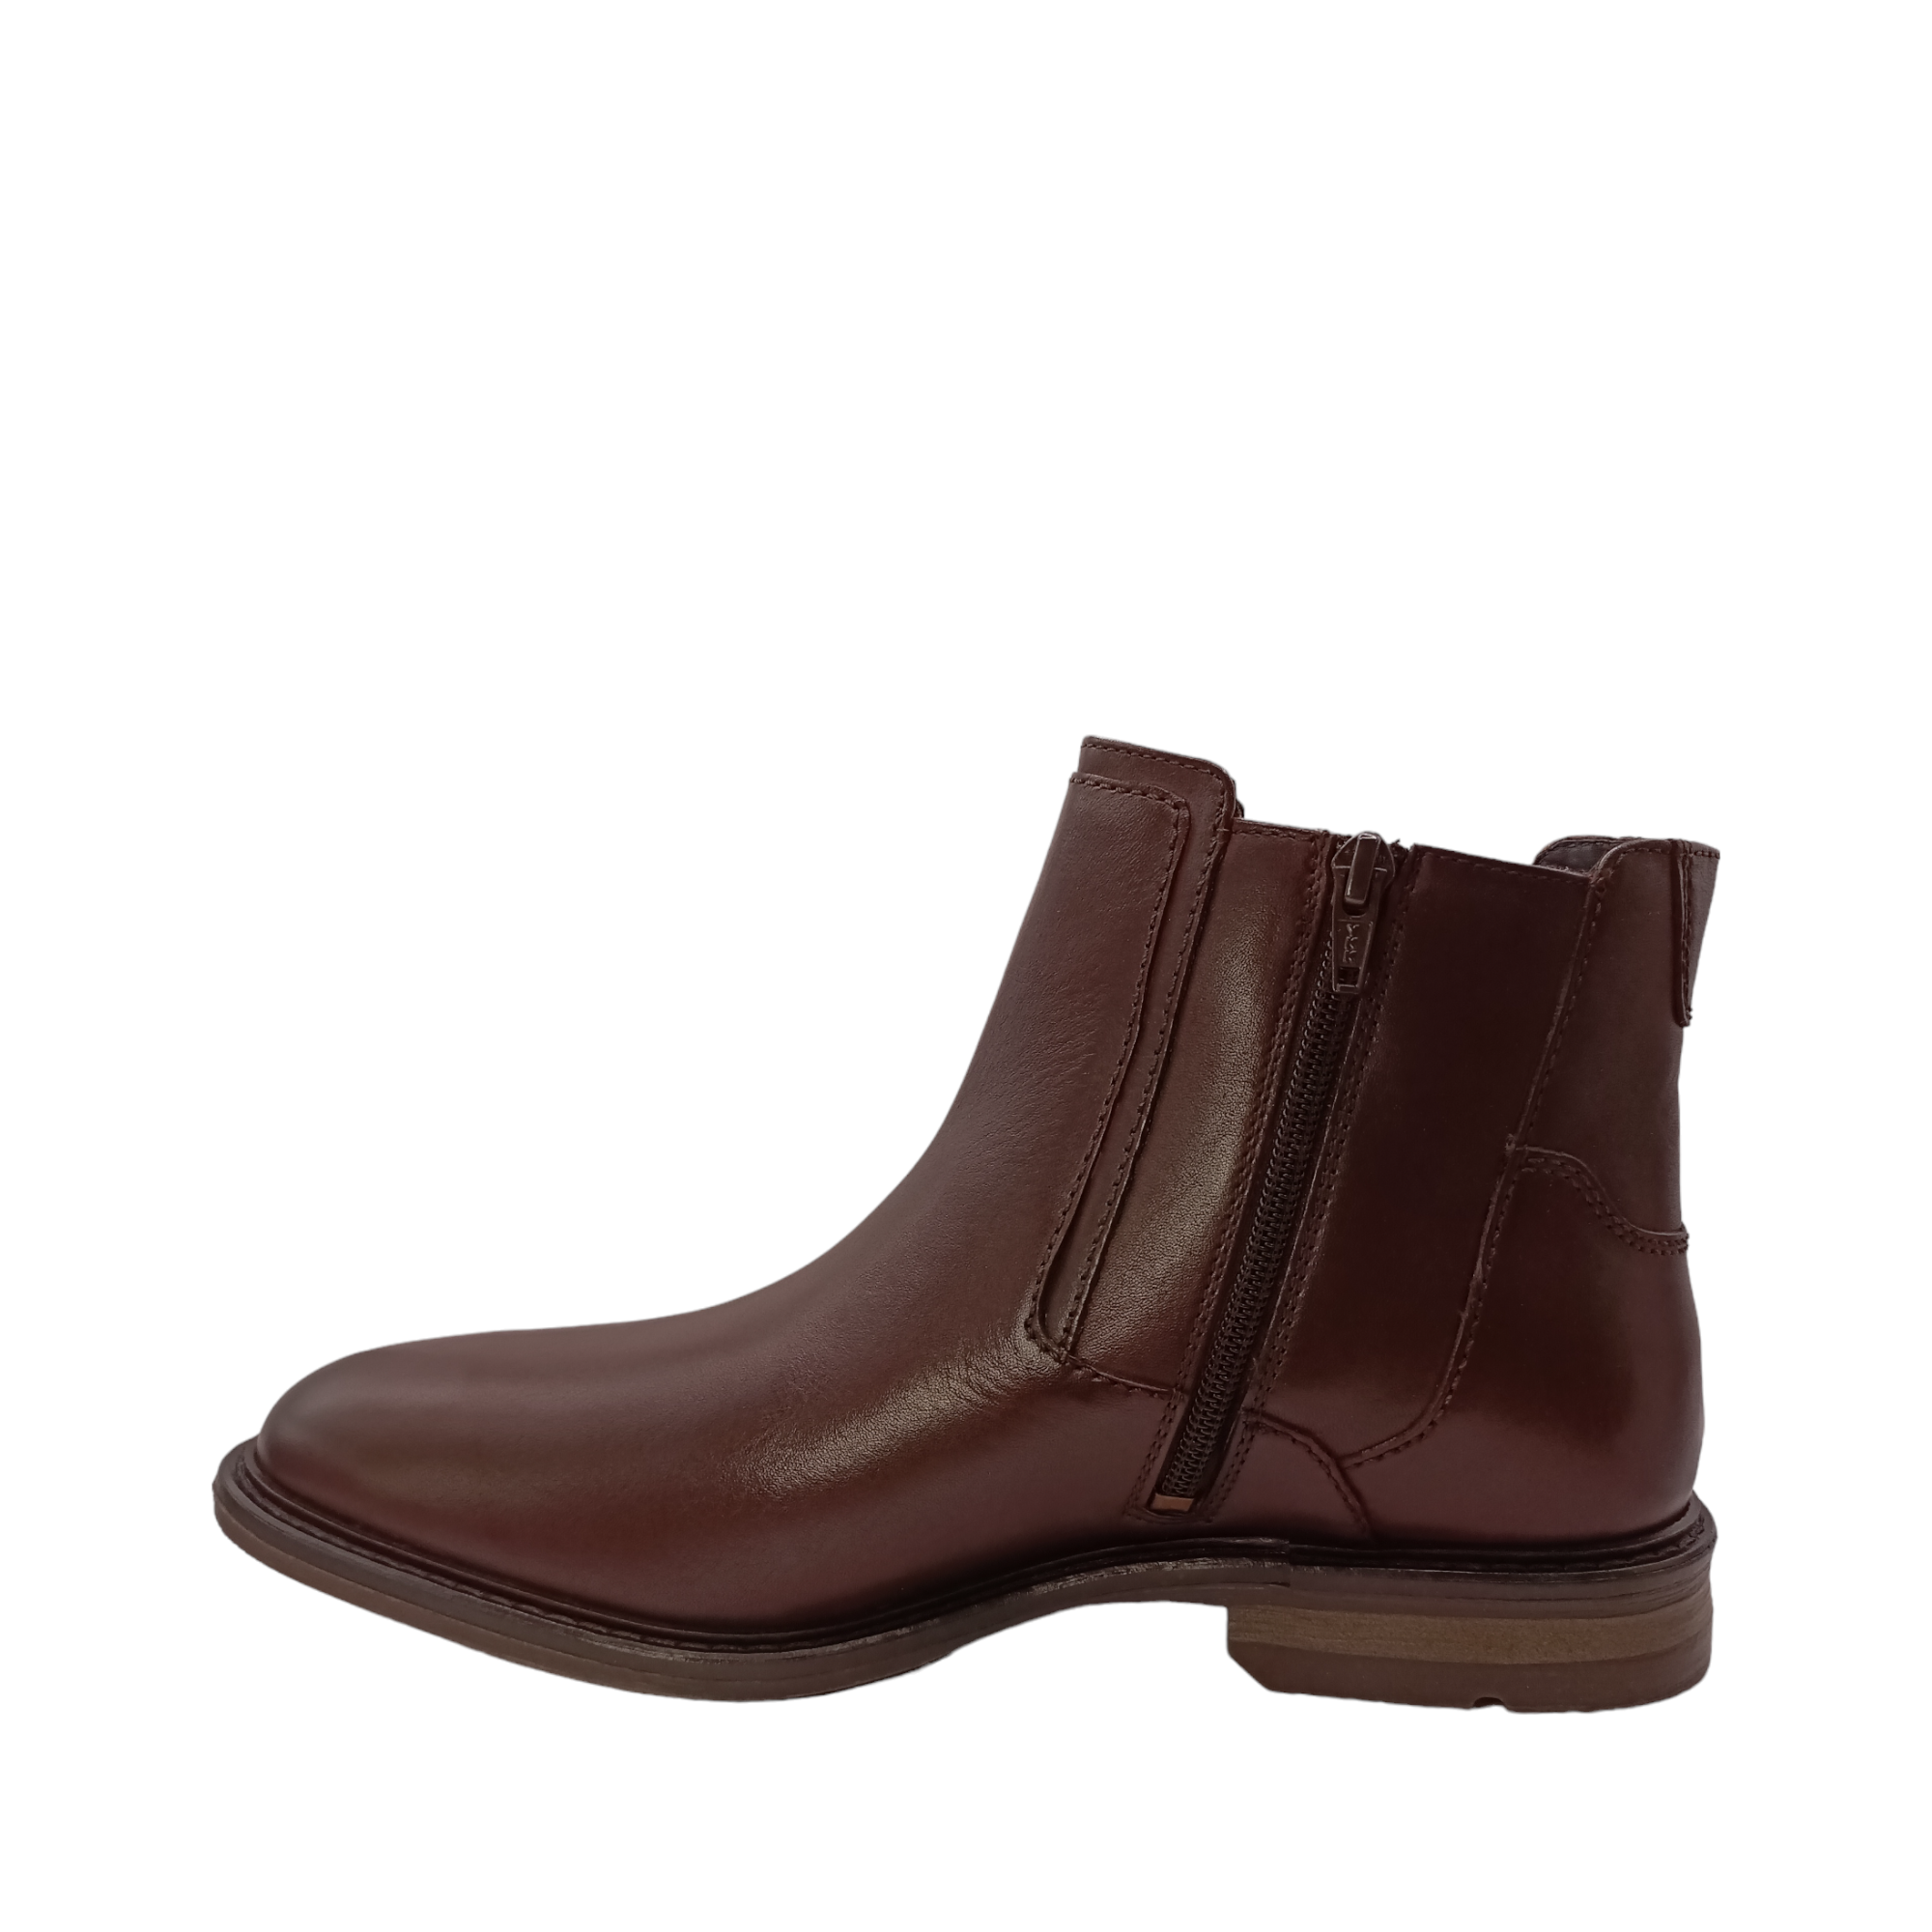 Side angle view with side zip of Earl 08 from Josef Seibel. Brown leather boot with large gusset. Shop online and instore with shoe&me